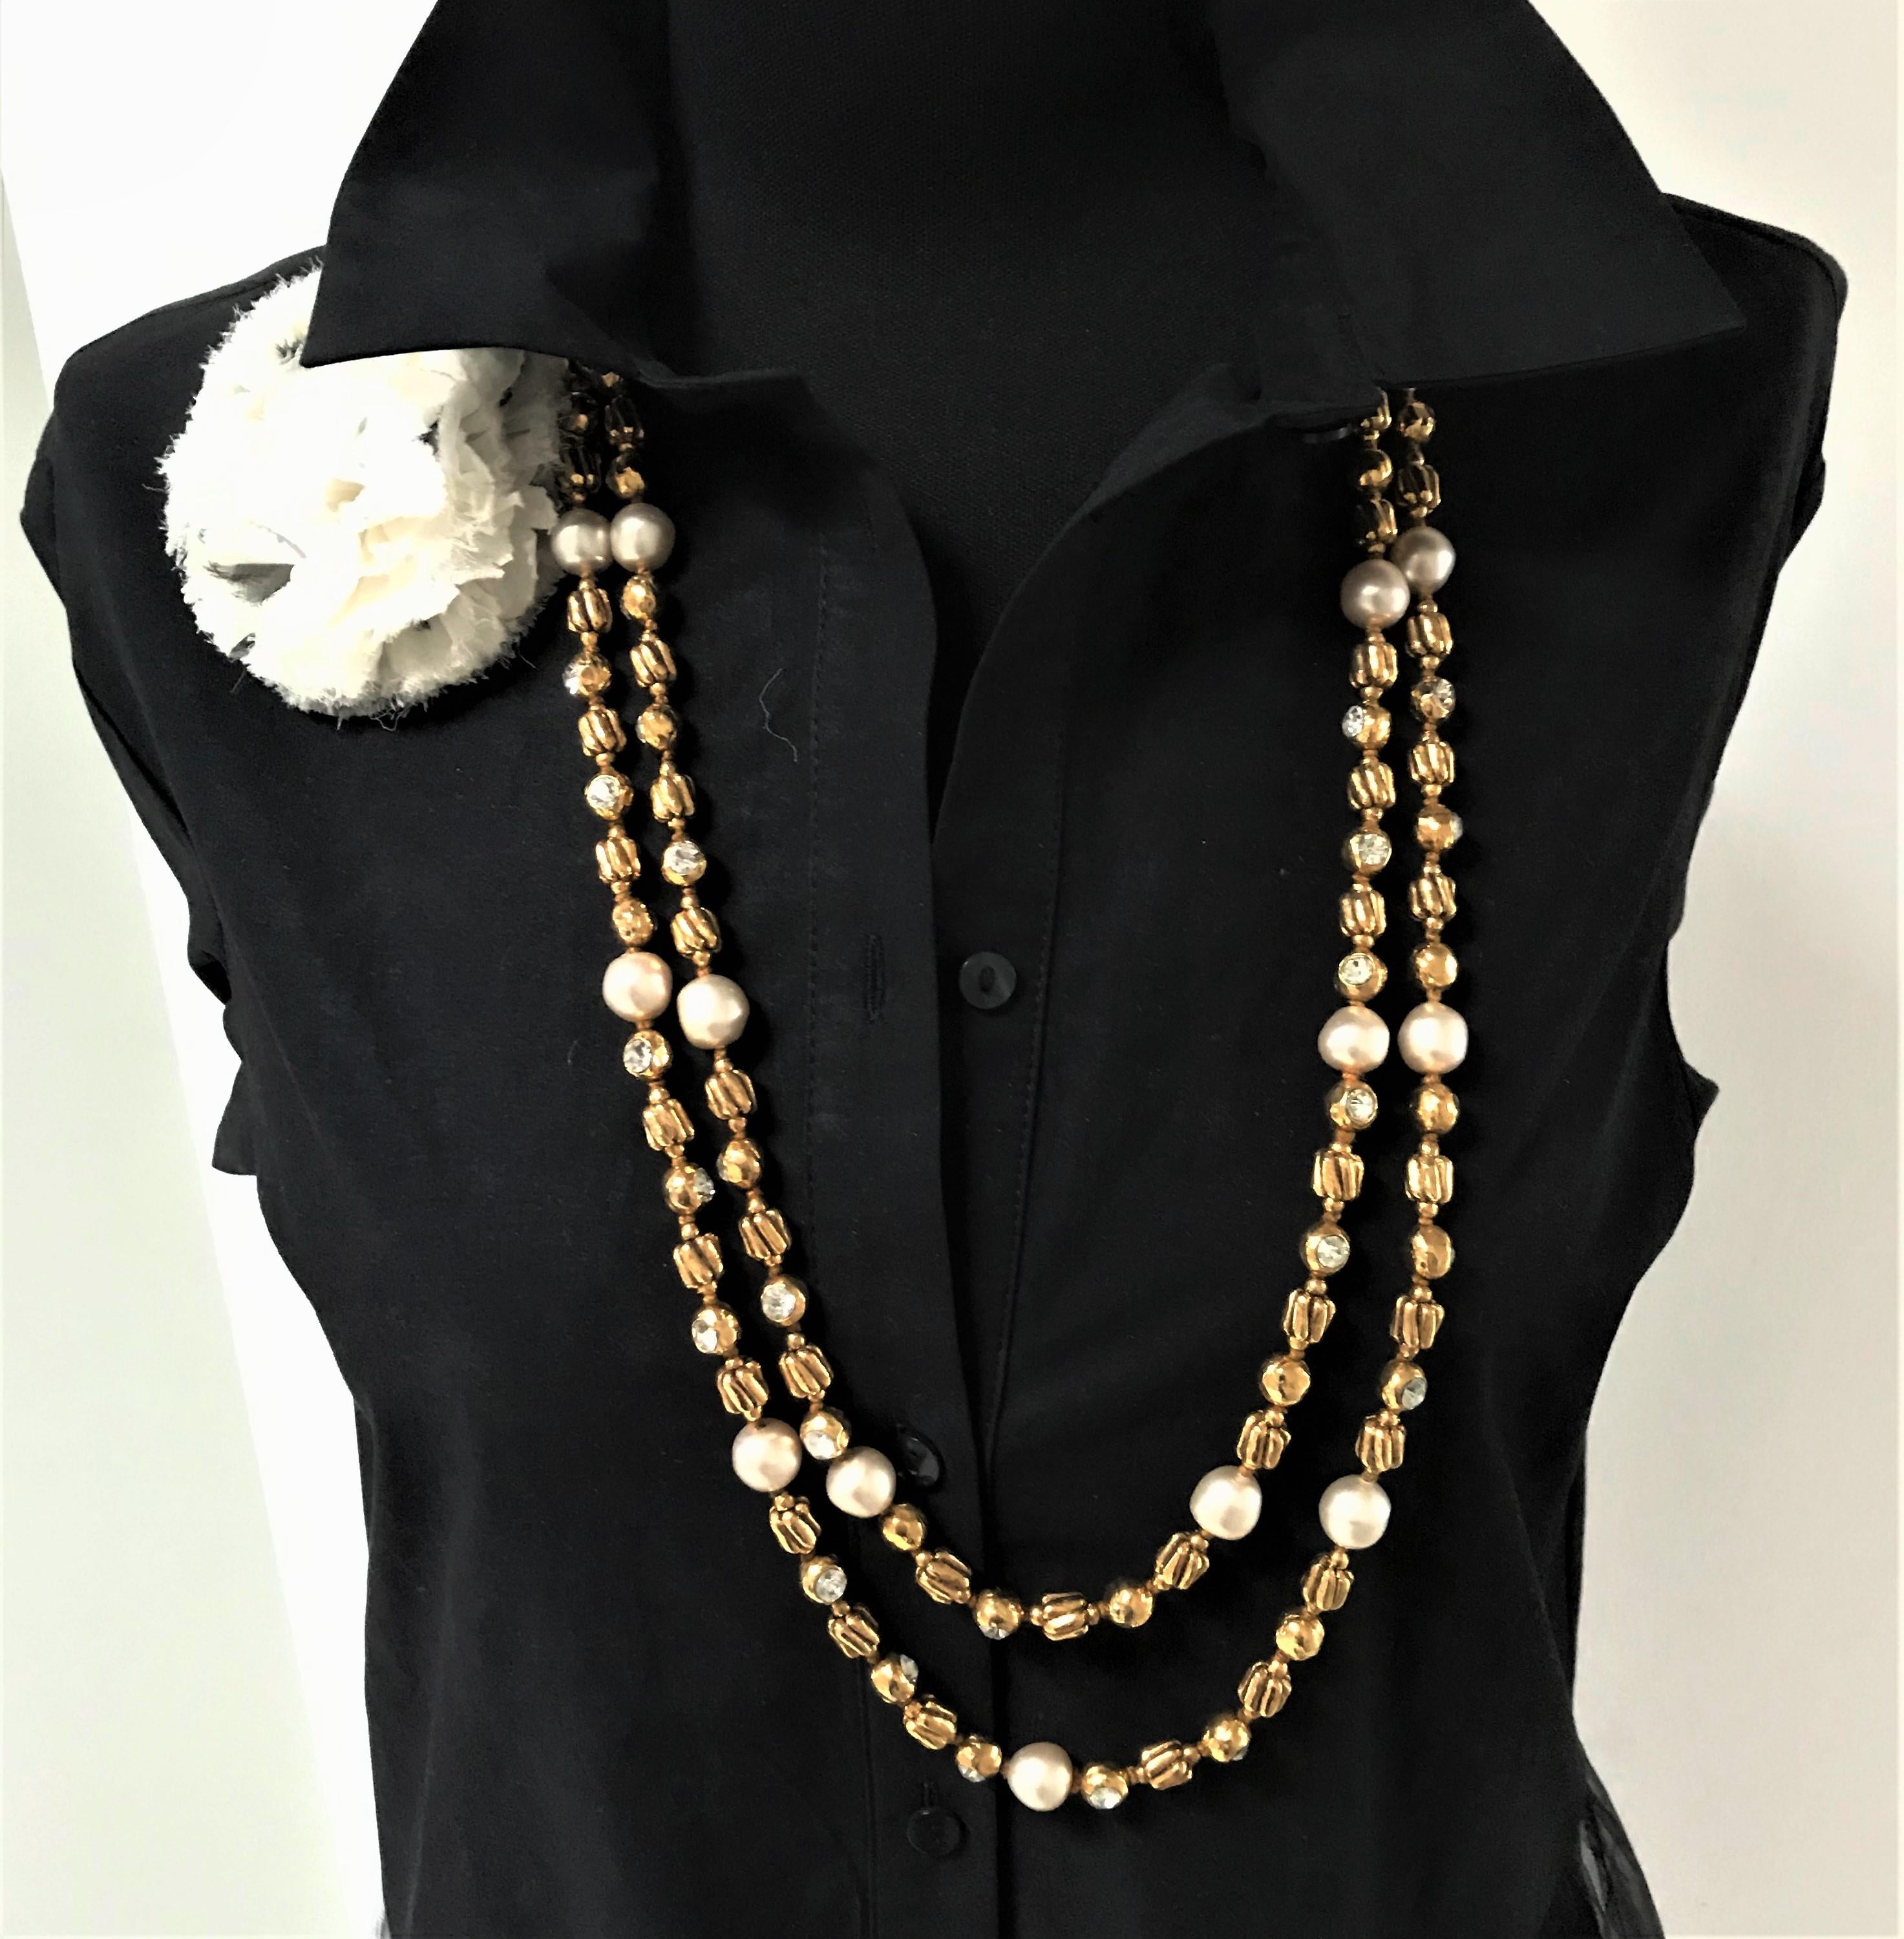 A great very long vintage Chanel Sautoir made by Robert Goossens Paris with crem colored faux pearls (made by Gripoix), gold balls filled with large diamante rhinestones and other gold elements, made by R. Goossens. The sautoir can be worn twice or